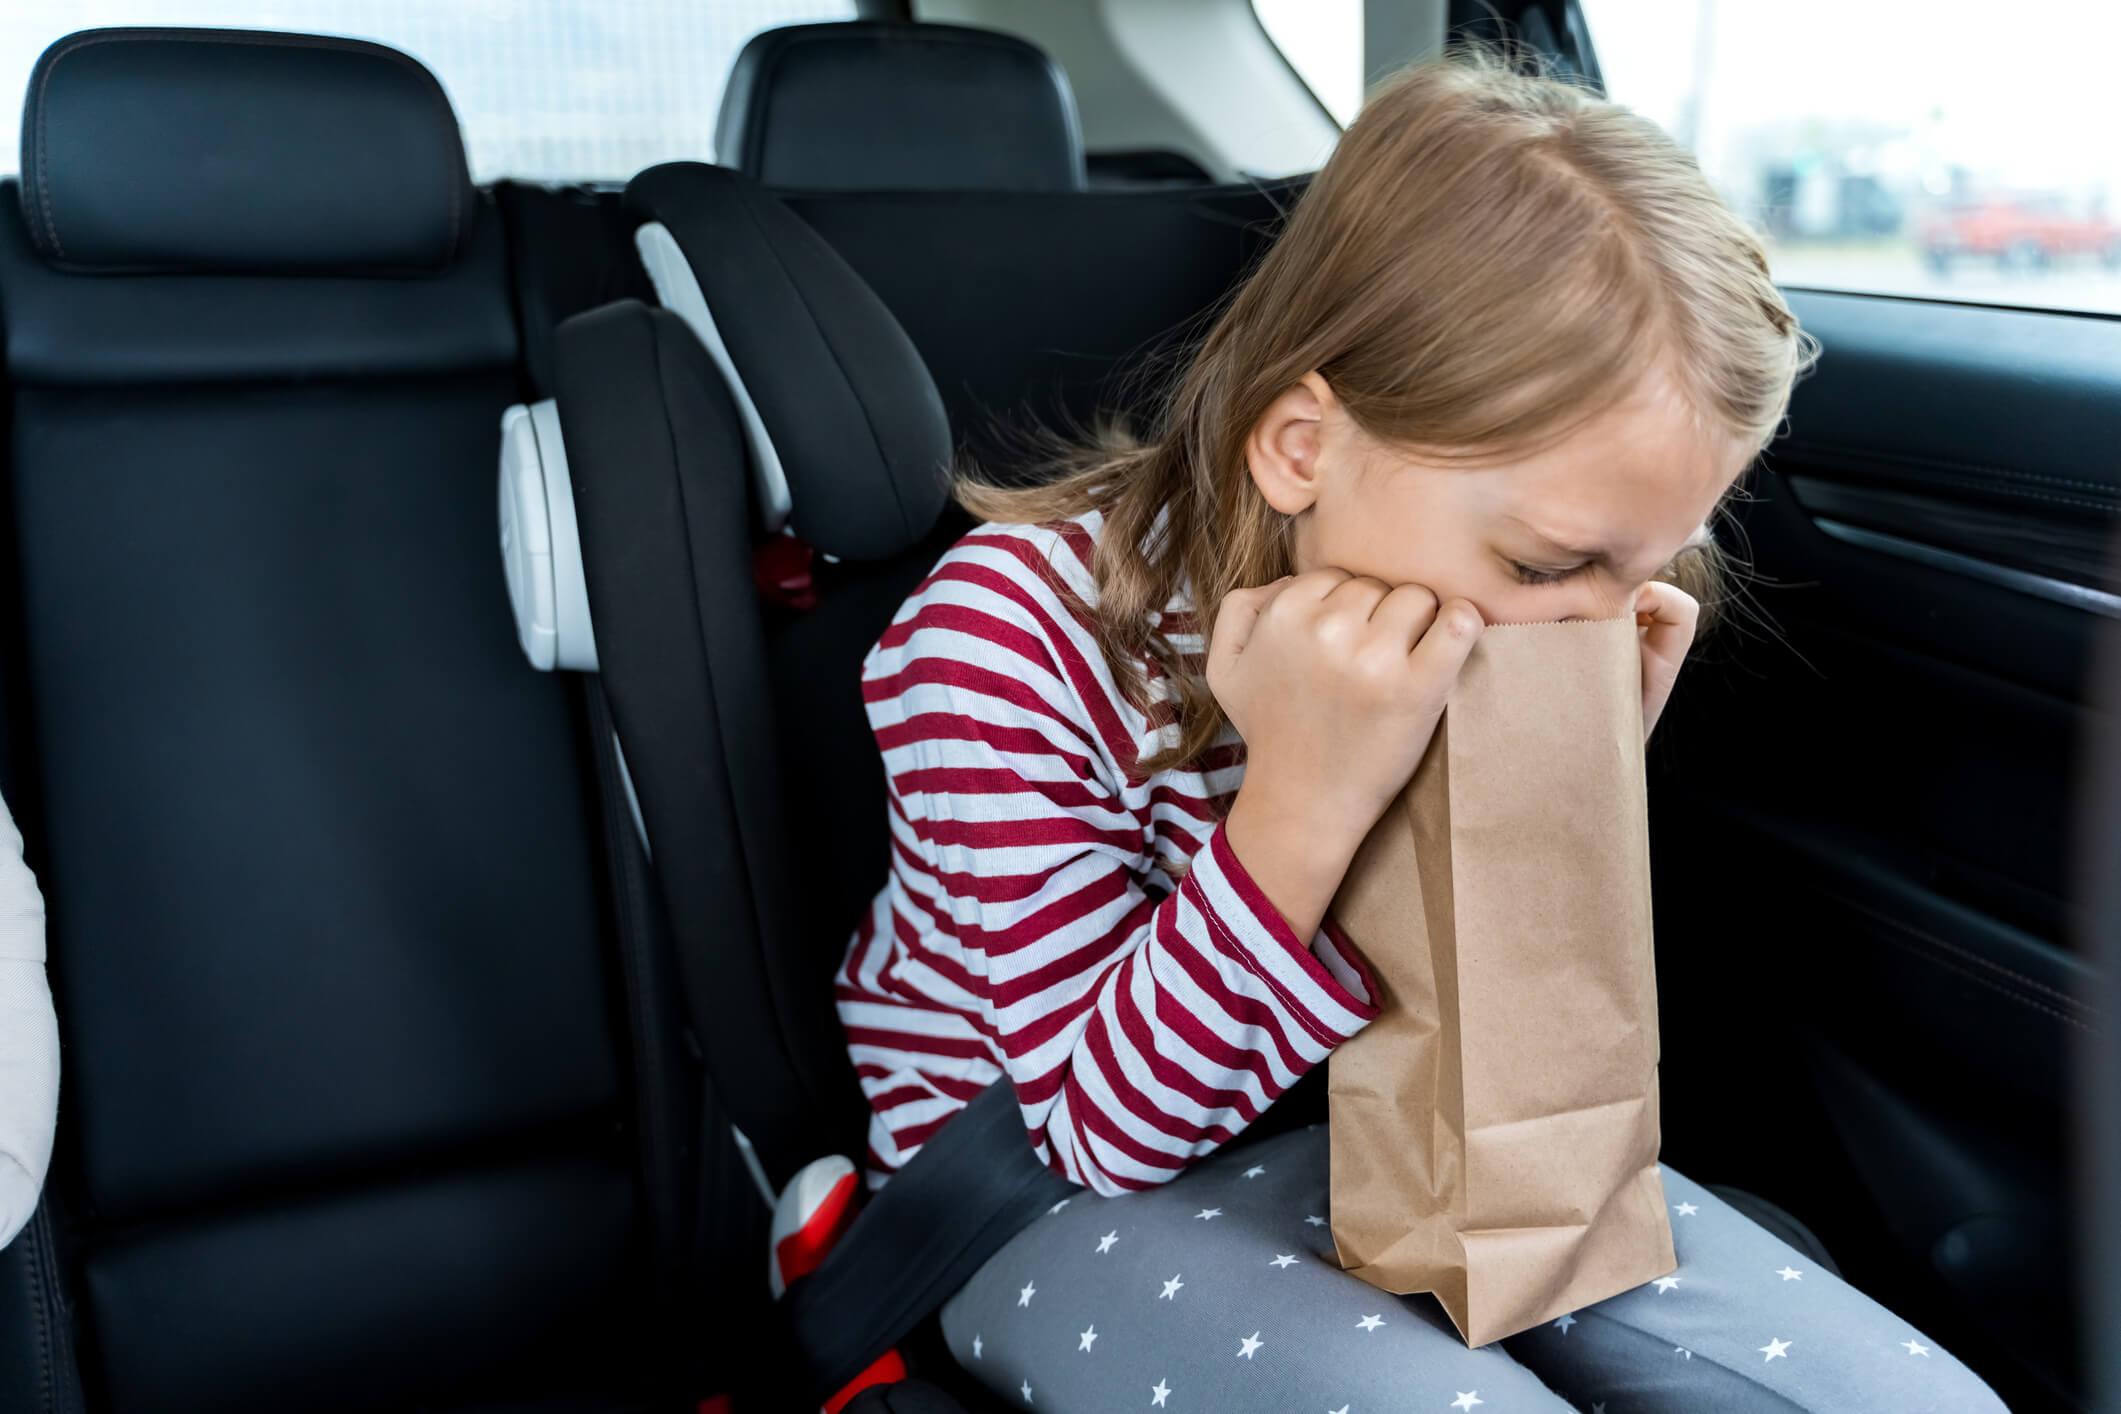 A child in a car seat holding a brown paper bag and looking unwell